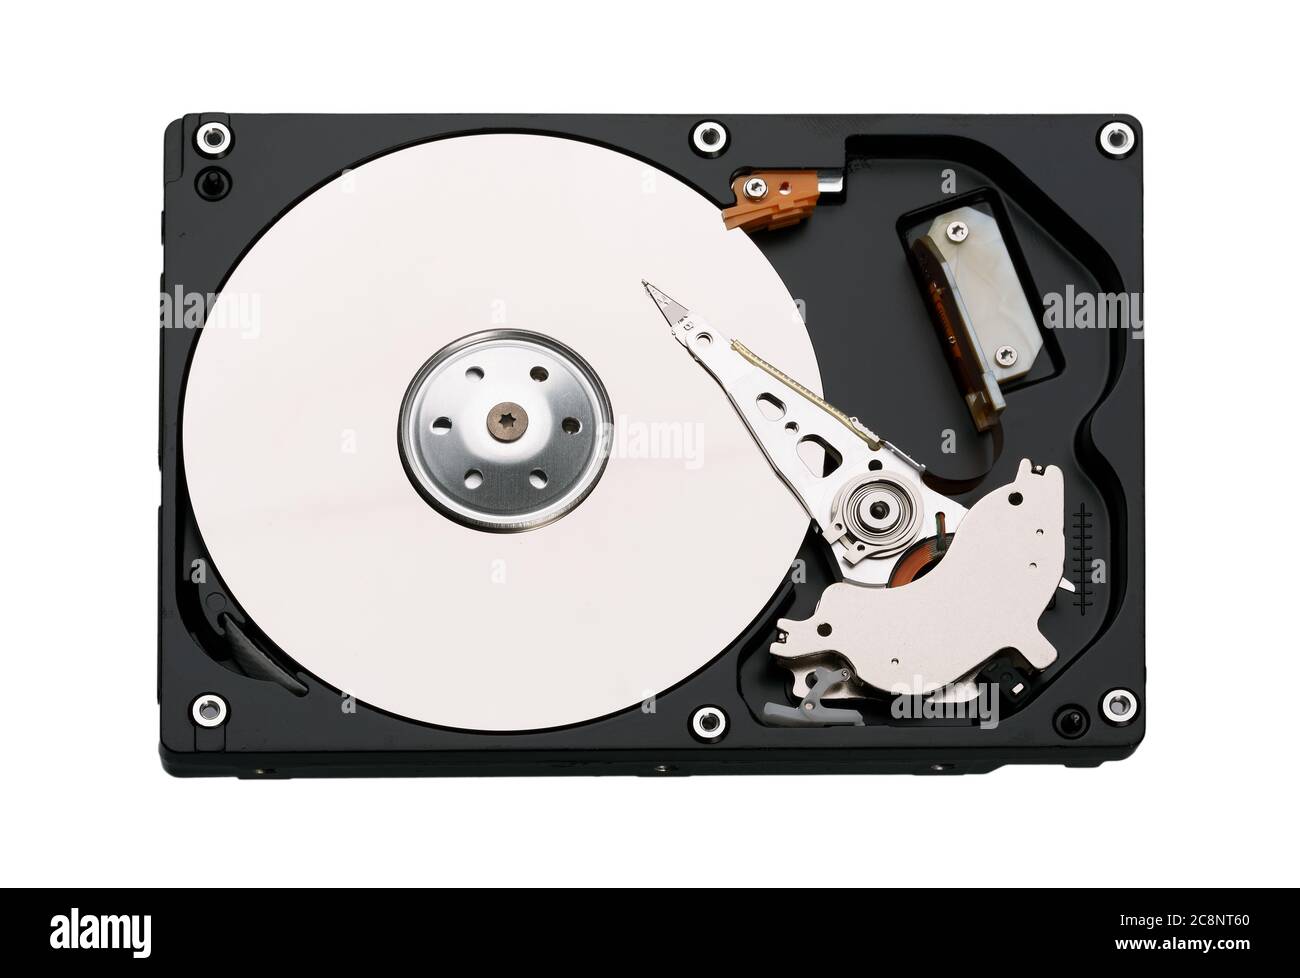 Opened hard drive unit from above. Stock Photo